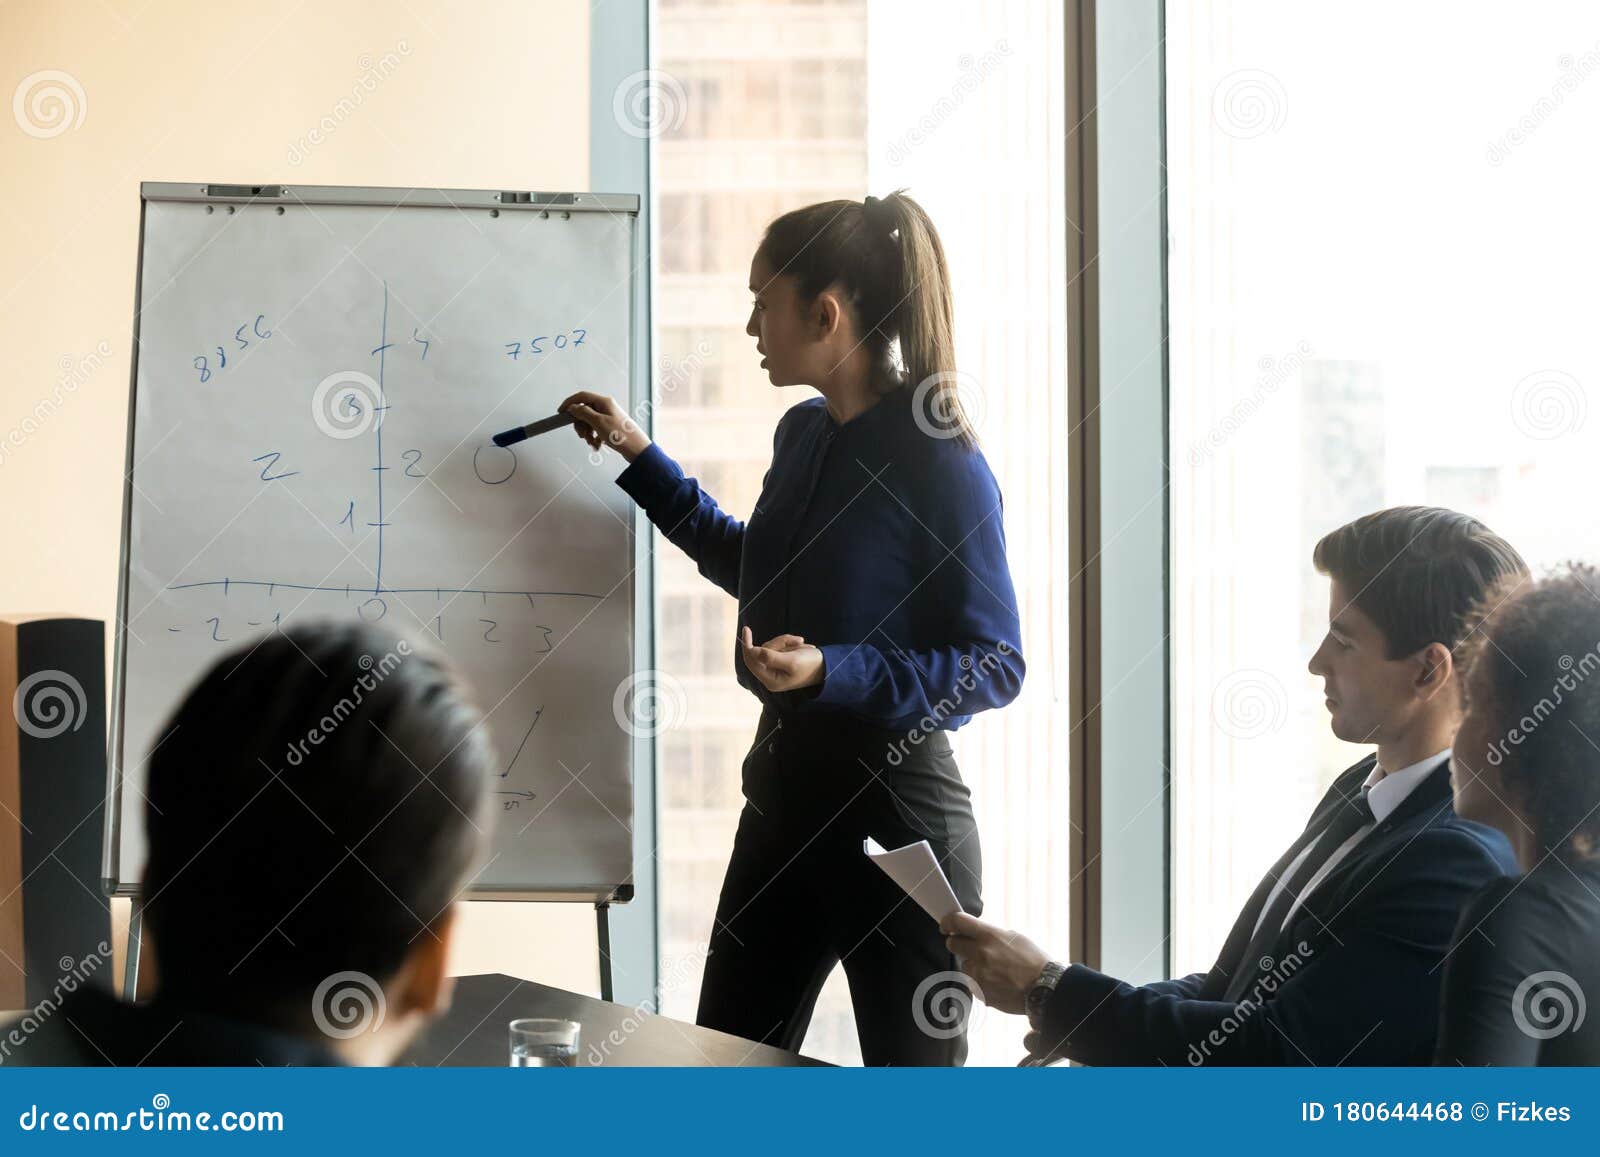 confident-businesswoman-giving-flip-chart-presentation-corporate-briefing-pointing-to-graph-female-coach-mentor-explaining-180644468.jpg